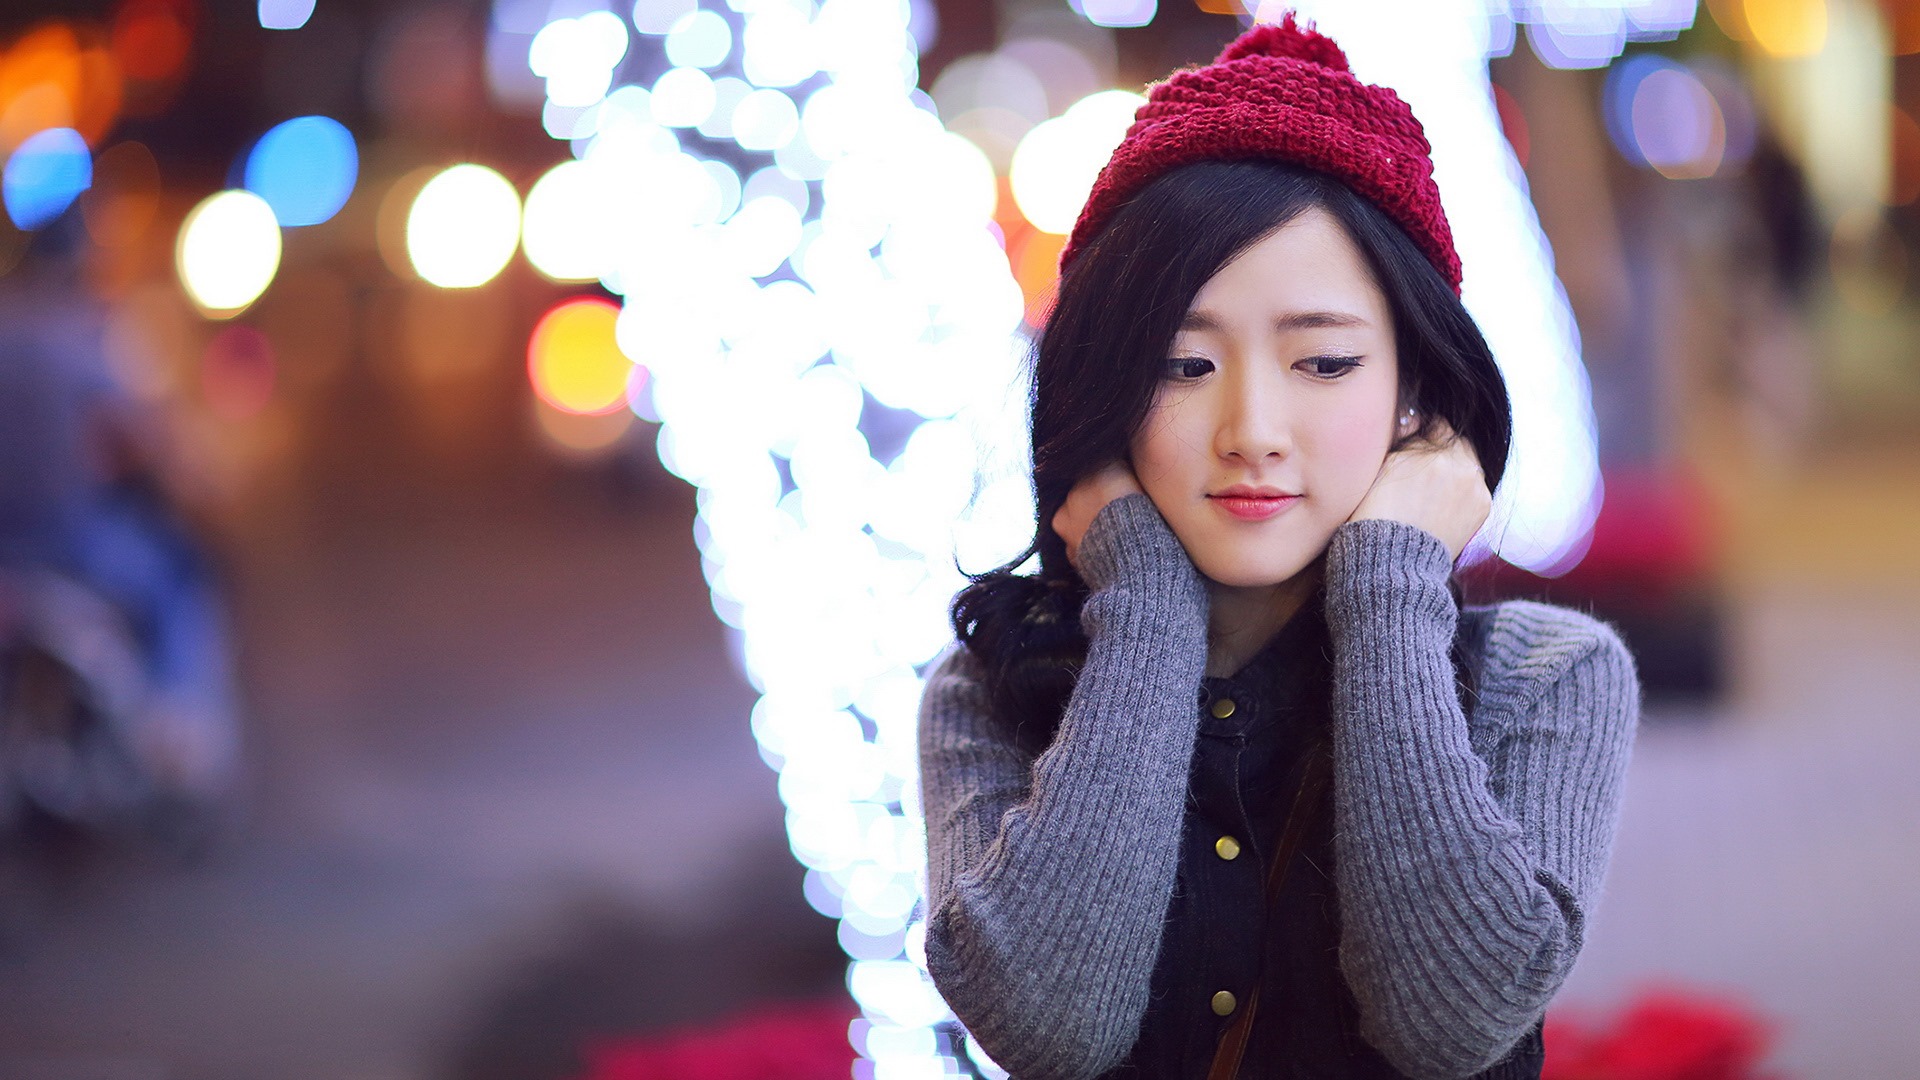 Pure and lovely young Asian girl HD wallpapers collection (1) #27 - 1920x1080